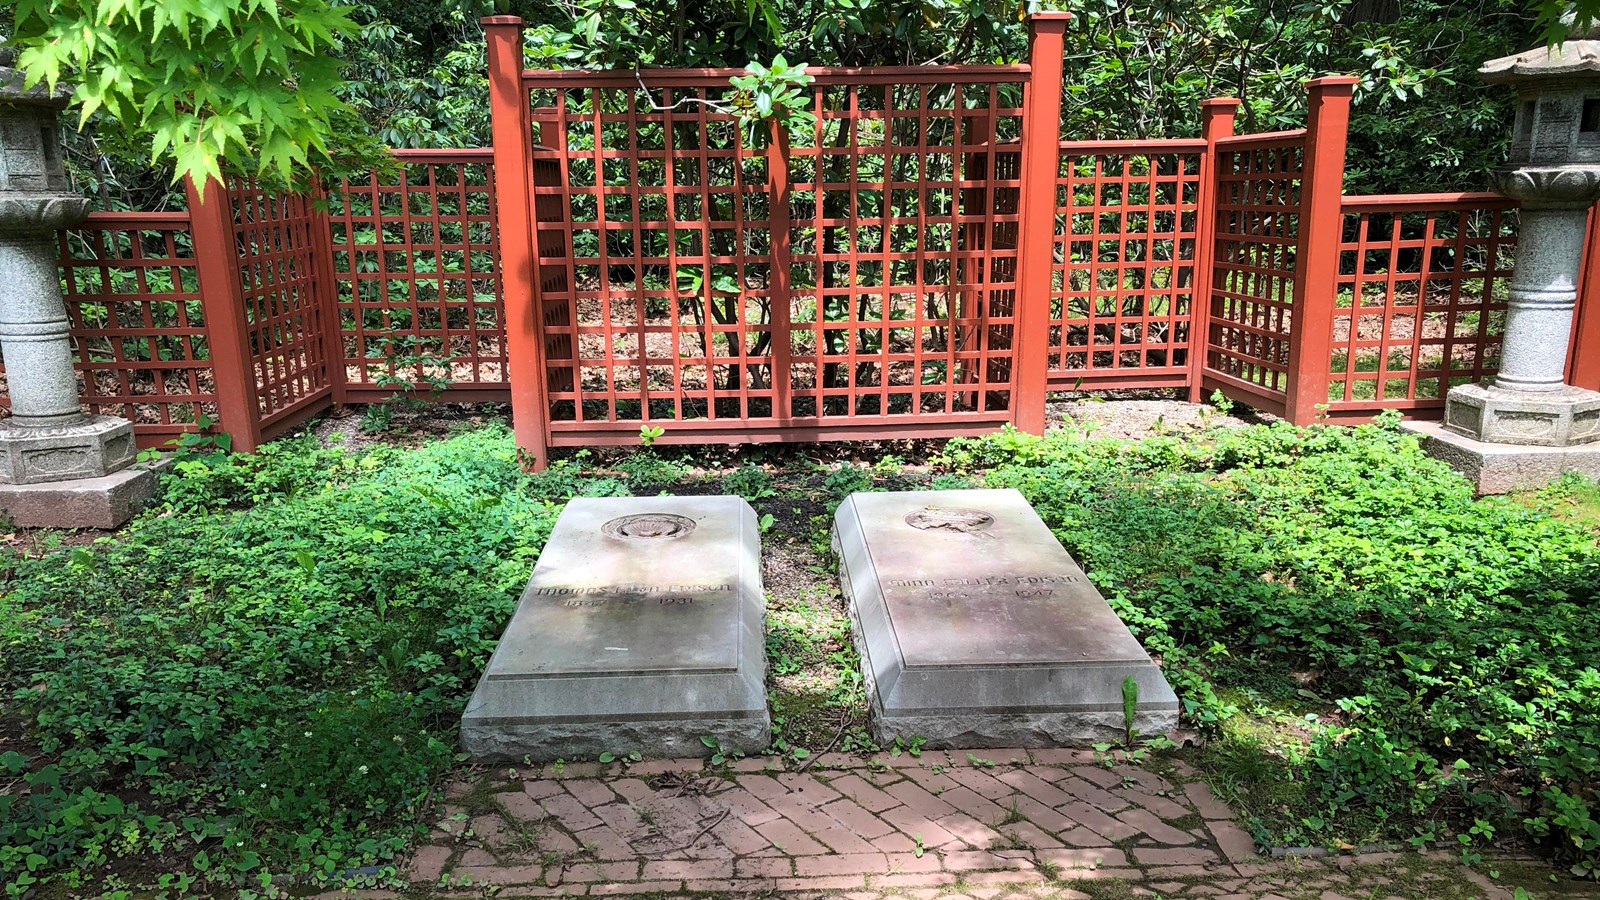 two stone slabs laying vertically side by side. A brick path, red fence and shrubs